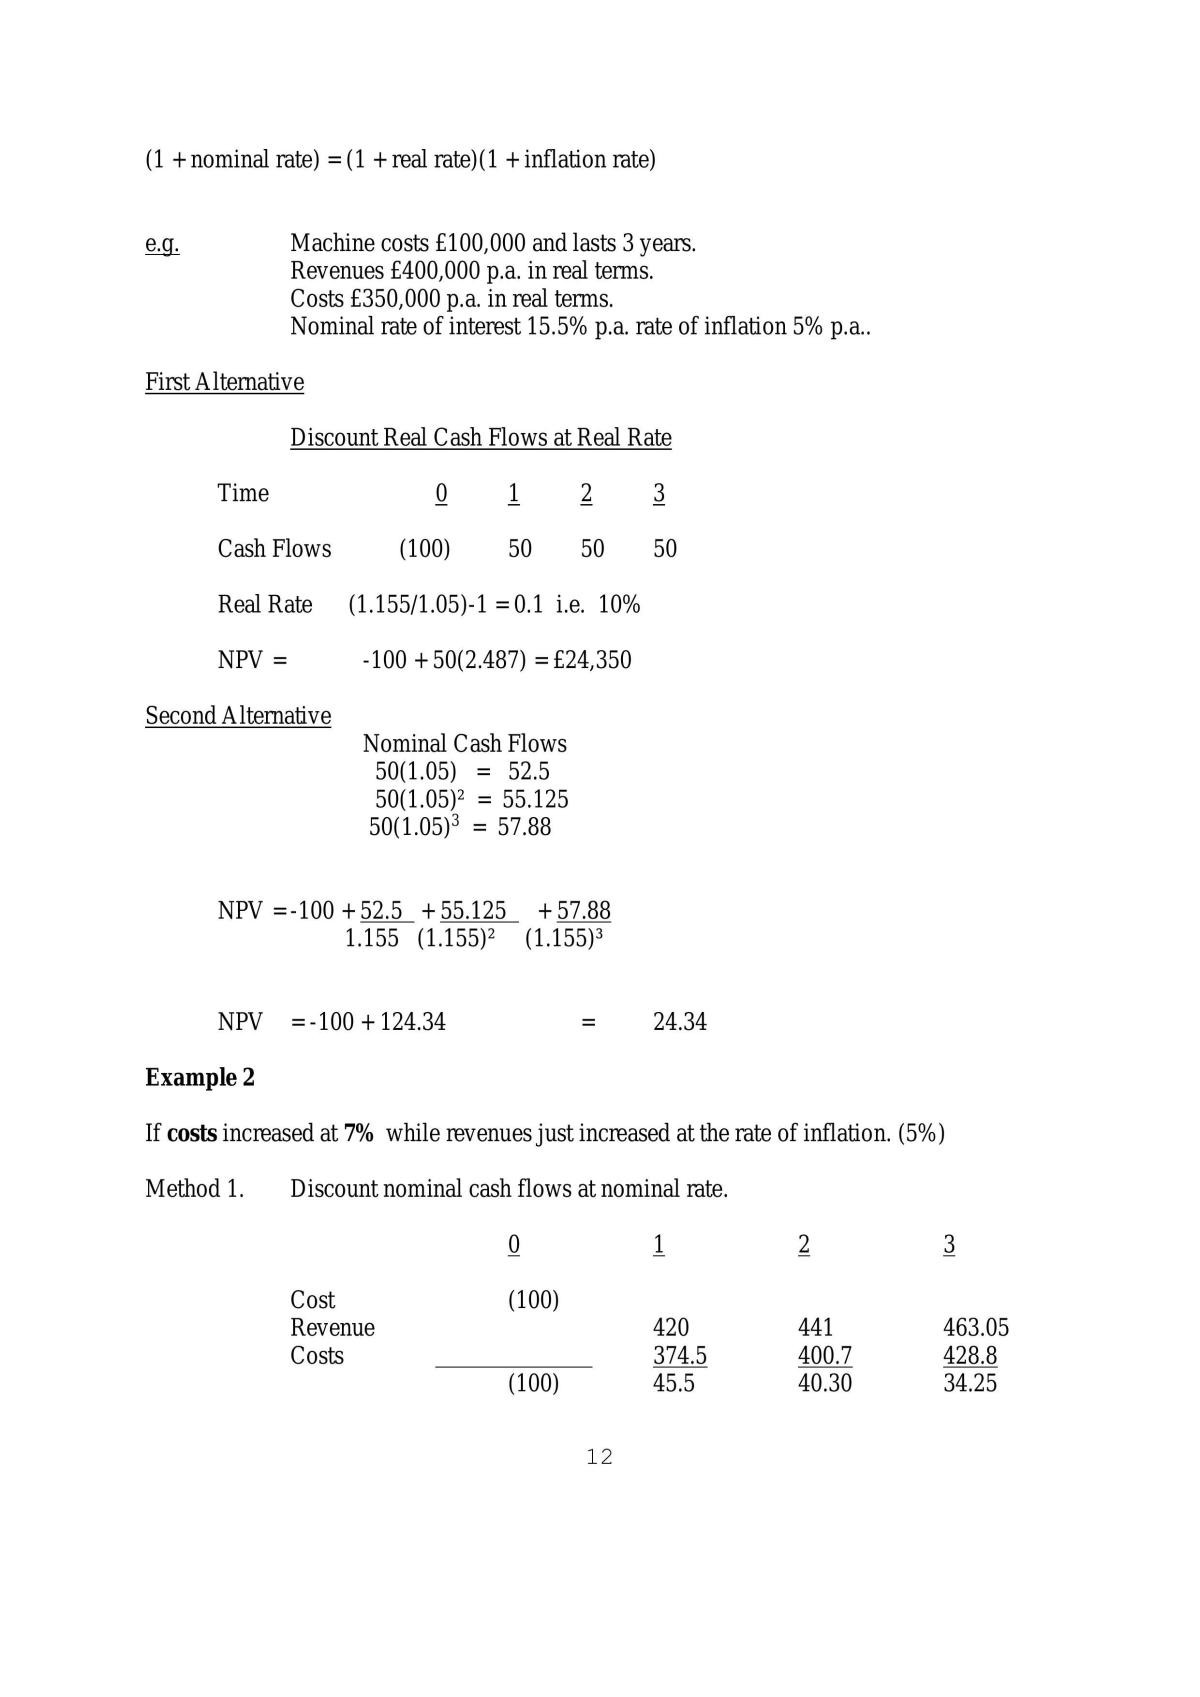 Complete Notes for Investment Appraisal Module - The Investment Decision - Page 12